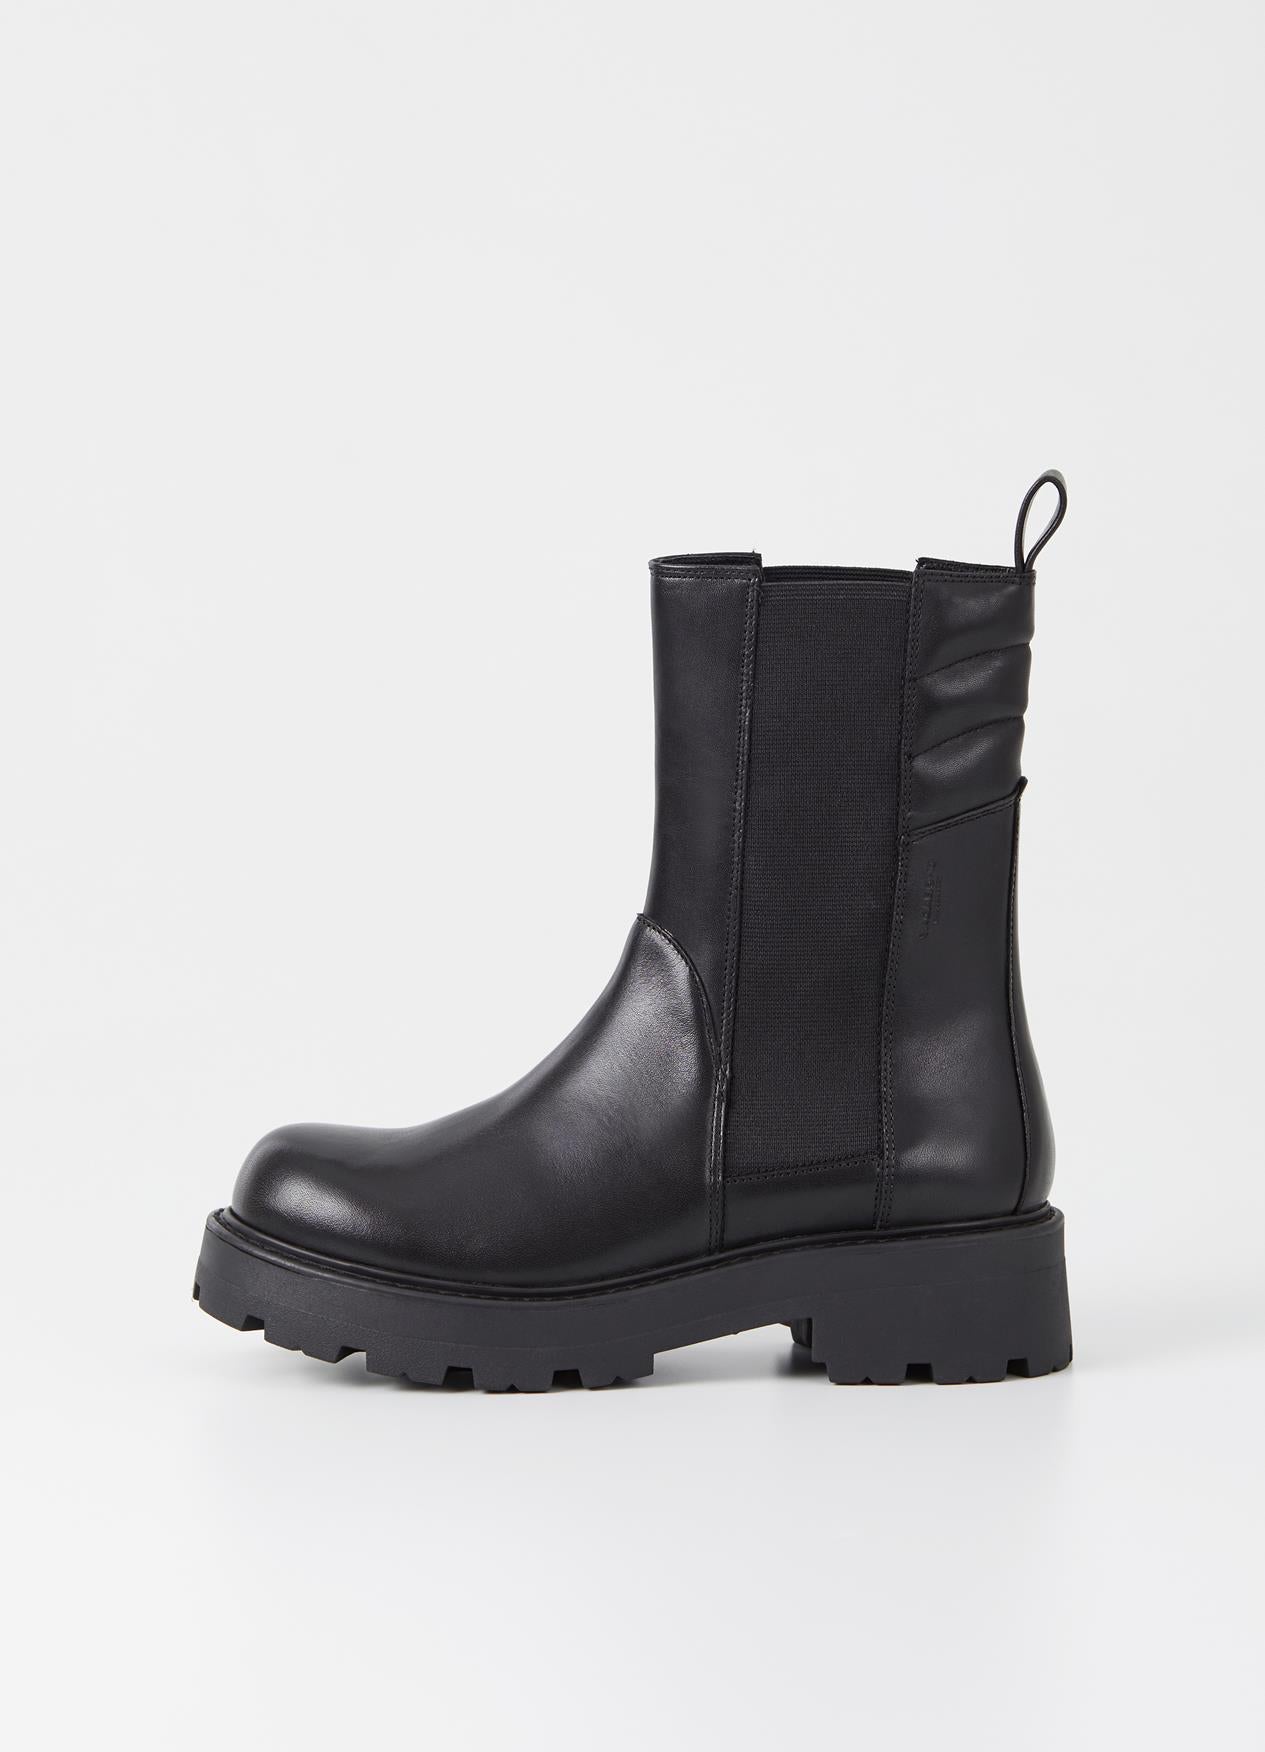 COSMO 2.0 ankle boot⎜Black